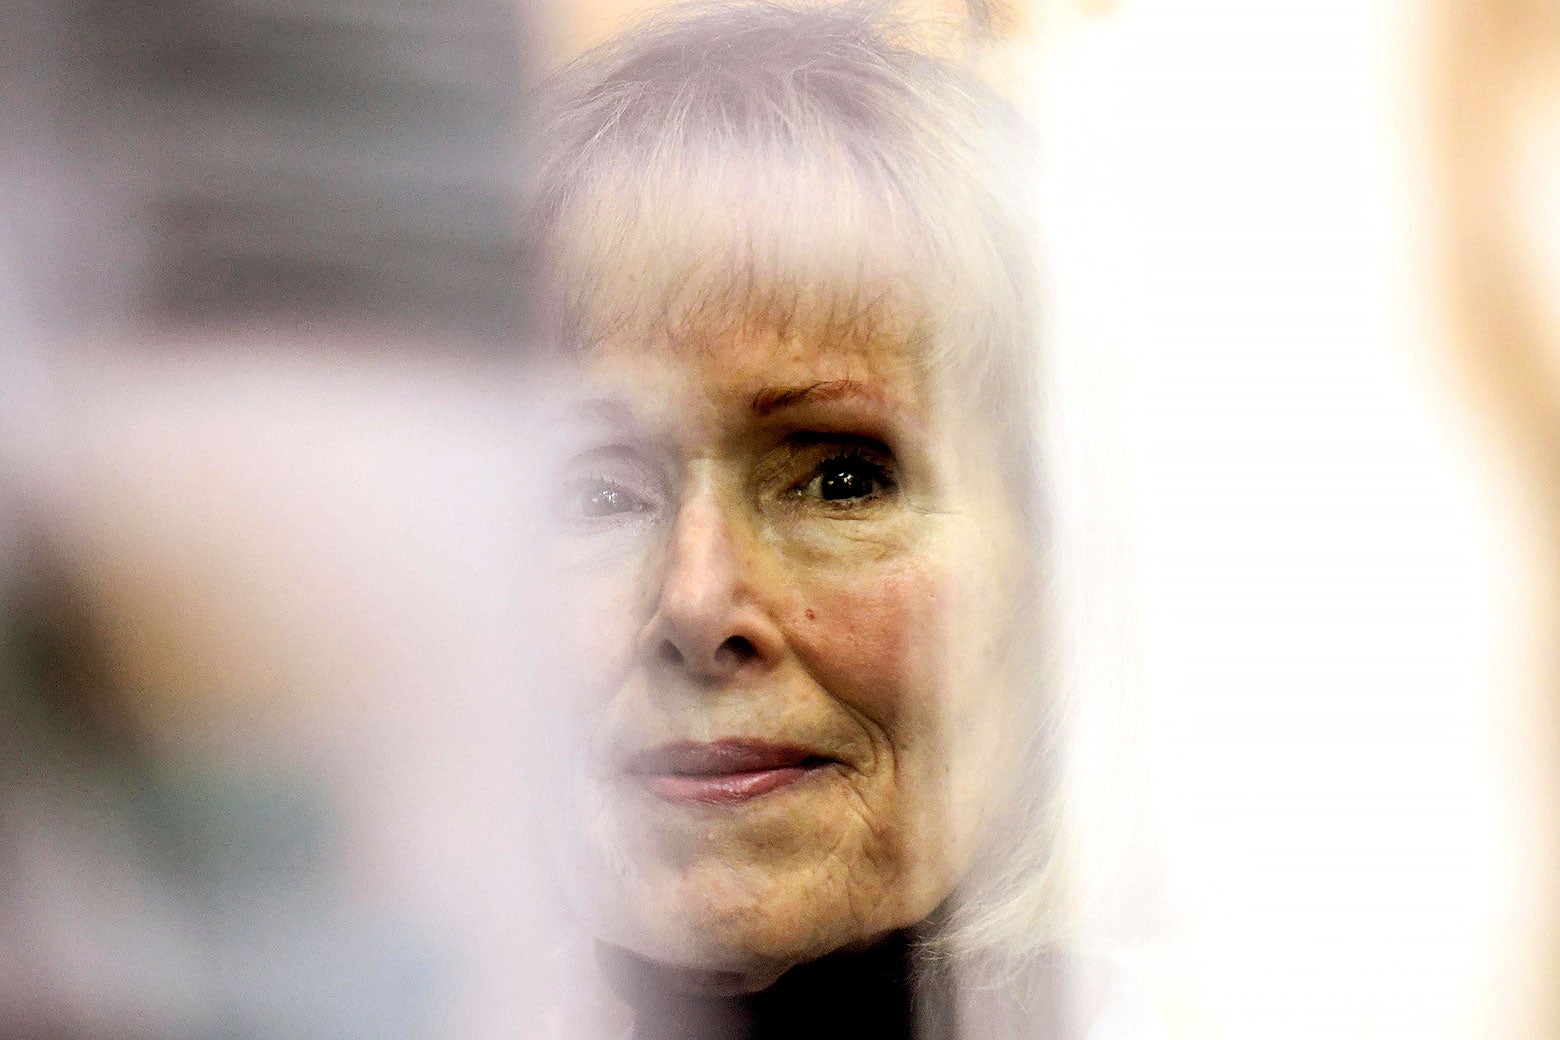 E. Jean Carroll looking at the viewer flanked by blurred images.